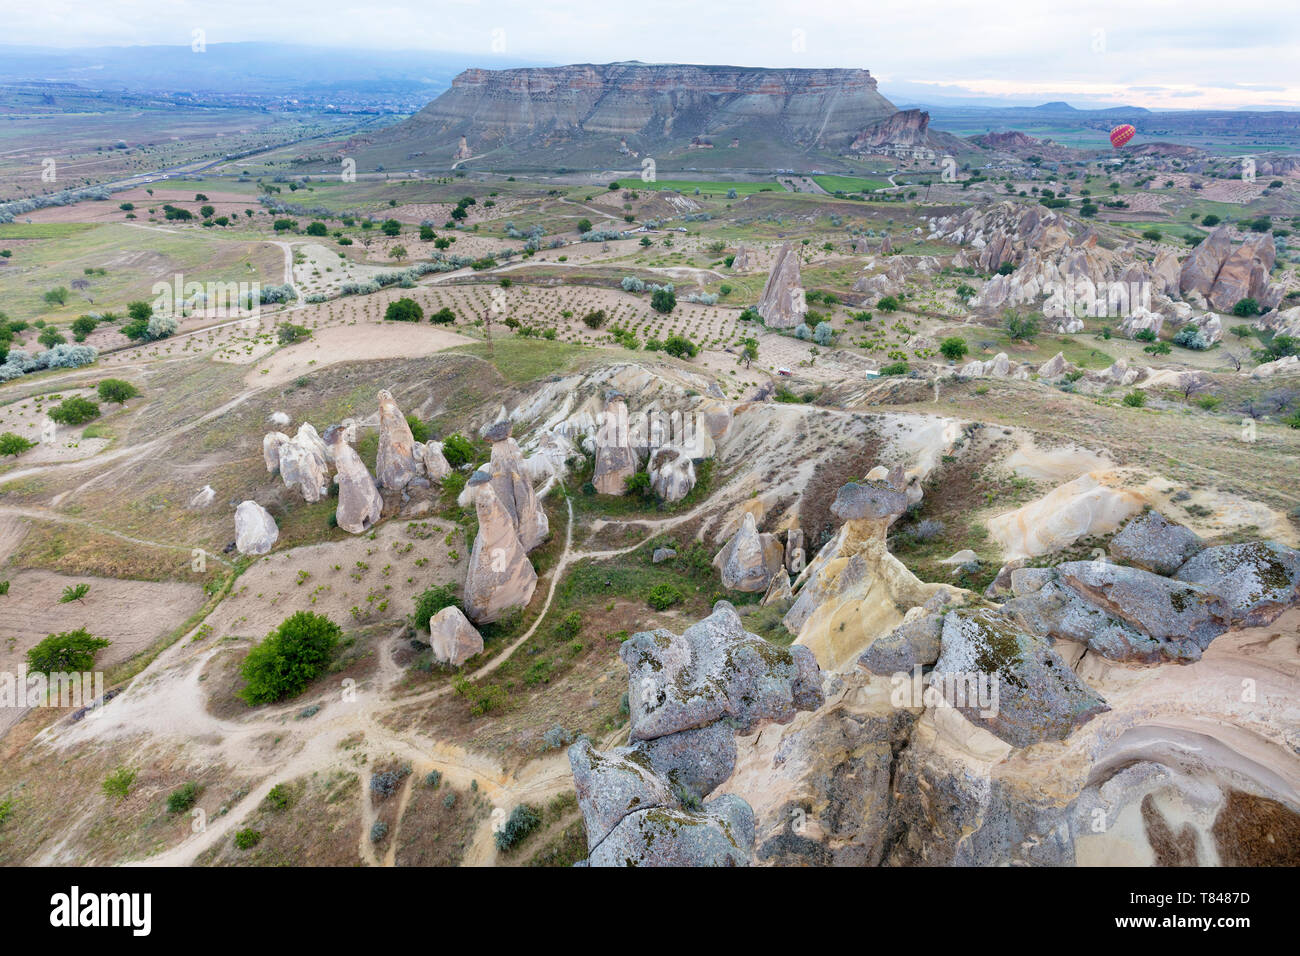 The mountains of Cappadocia impress with their nakedness and openness. Balloons rise above them. Stock Photo